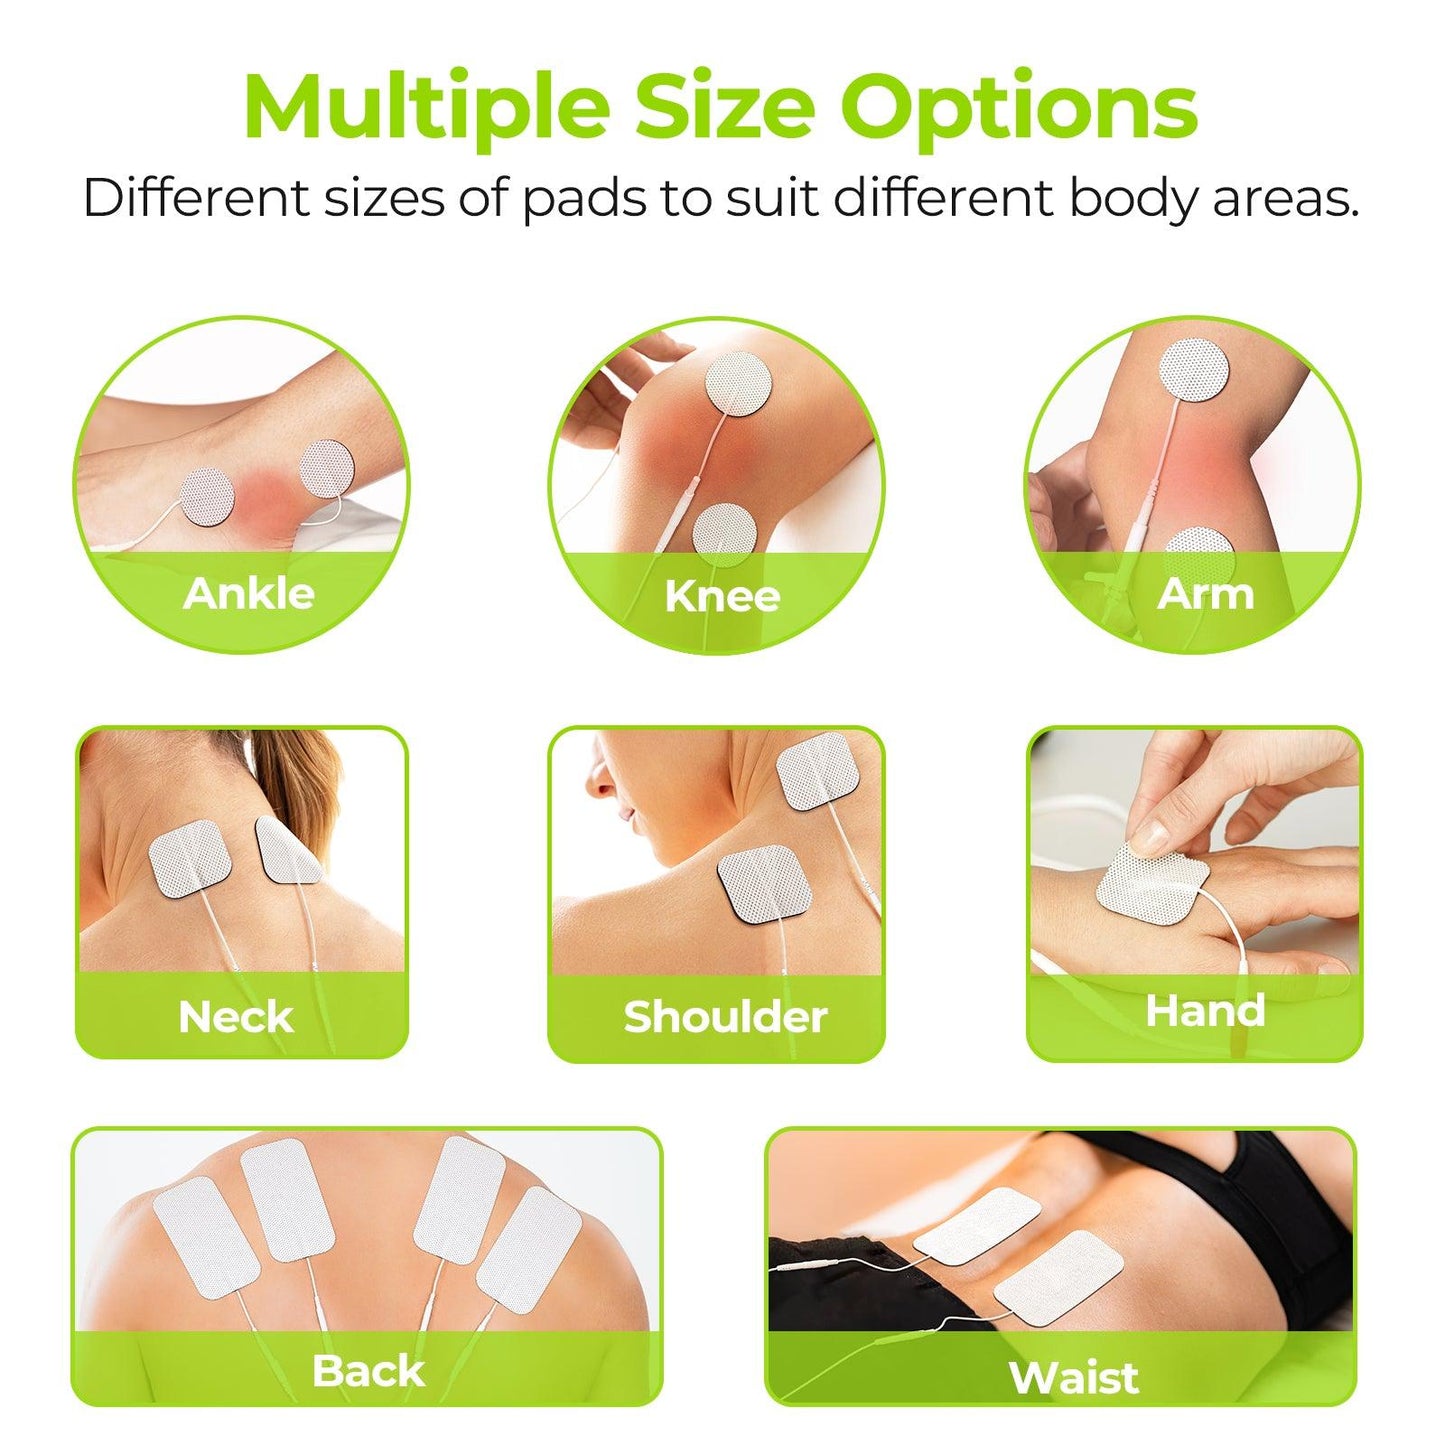 AUVON TENS Unit Replacement Pads Combination Set, 20 Packs Multiple Sizes Electrodes for TENS Unit, Reusable and Latex Free Pigtail TENS Pads for Multiple Pain Relief (2mm Connector) - AUVON